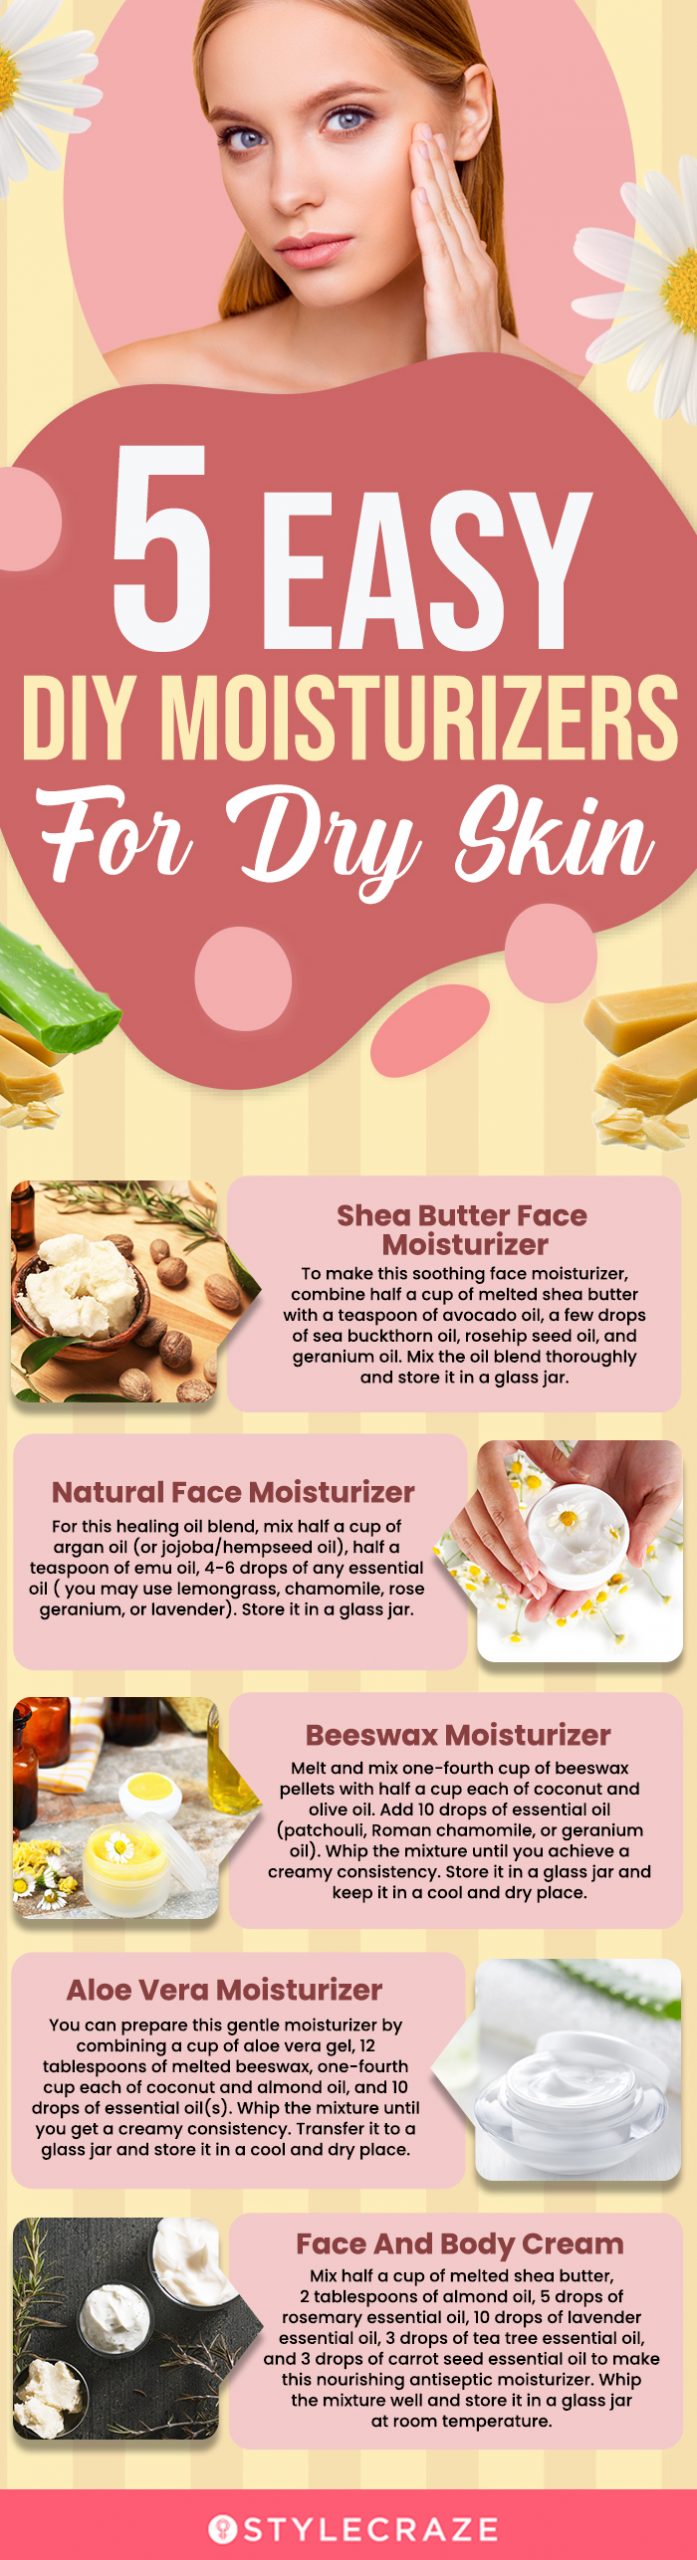 10 Simple And Homemade Moisturizers For Dry